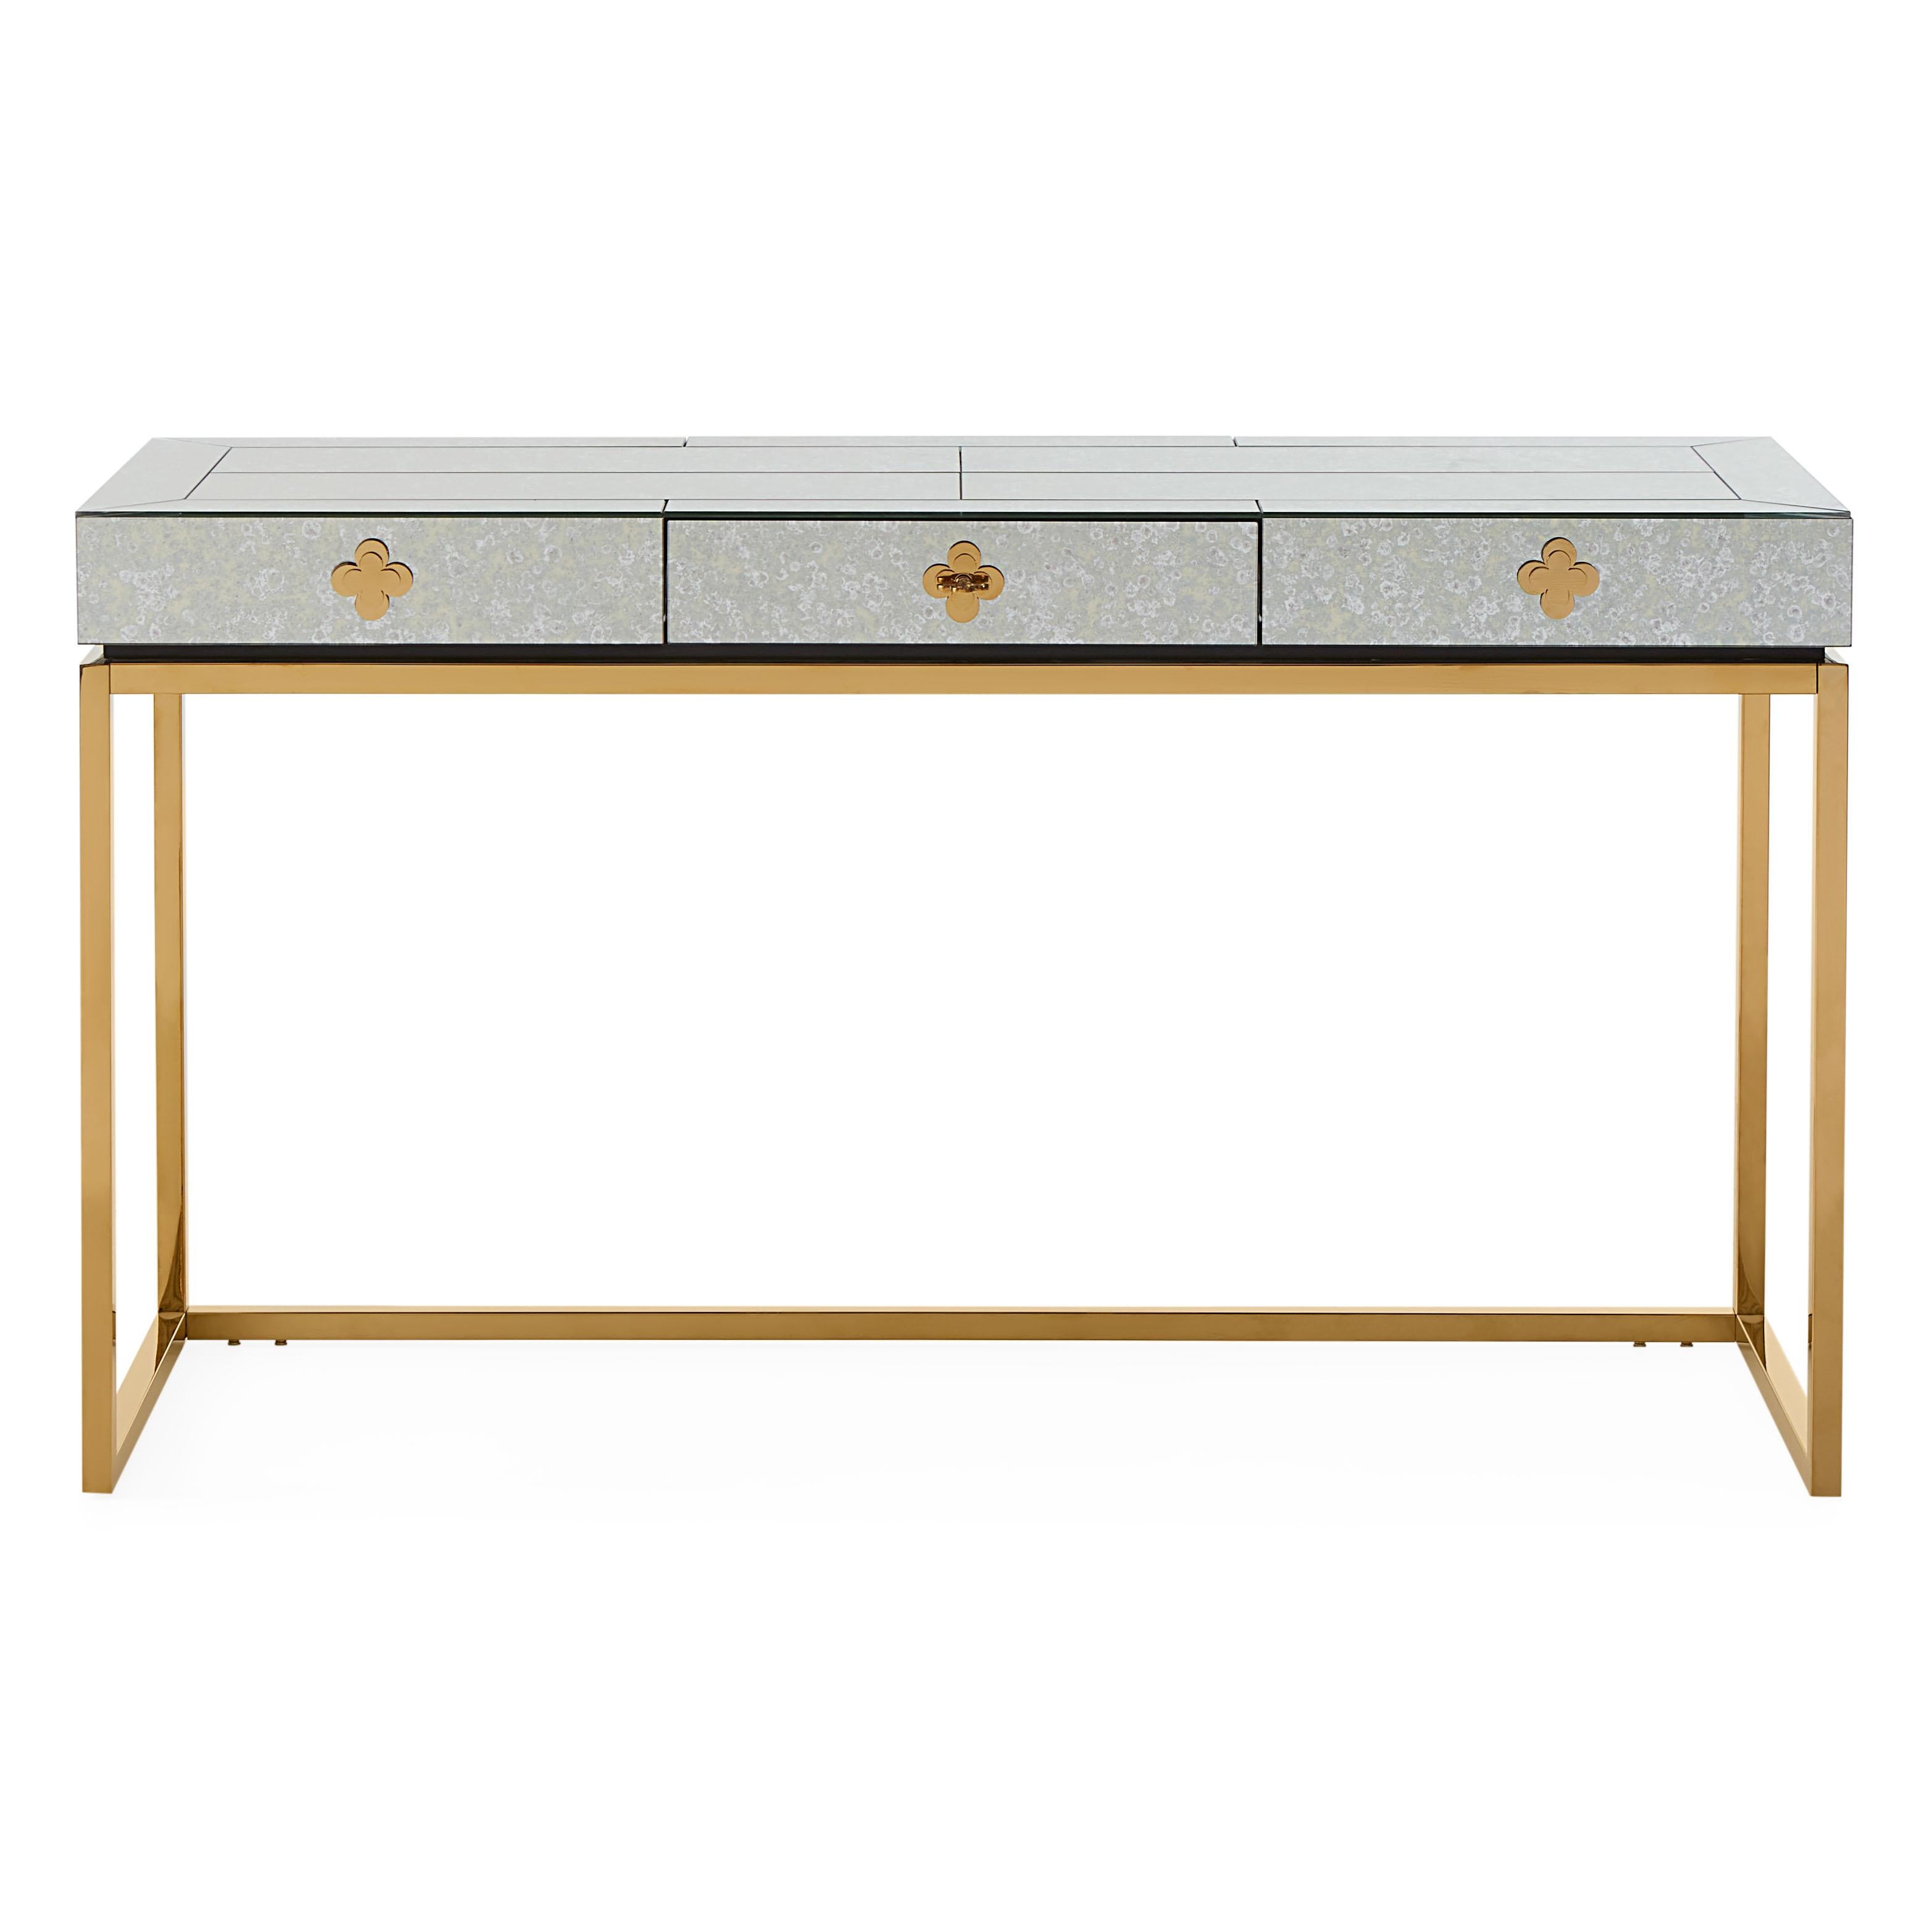 Reflectology. Minimalist forms meet Maximalist glamour. Antiqued mirror with a polished brass base. Our Delphine Desk features a single center drawer finished with bright robin's egg blue lacquer. Perfect in a starlet's study or as a bold finish for